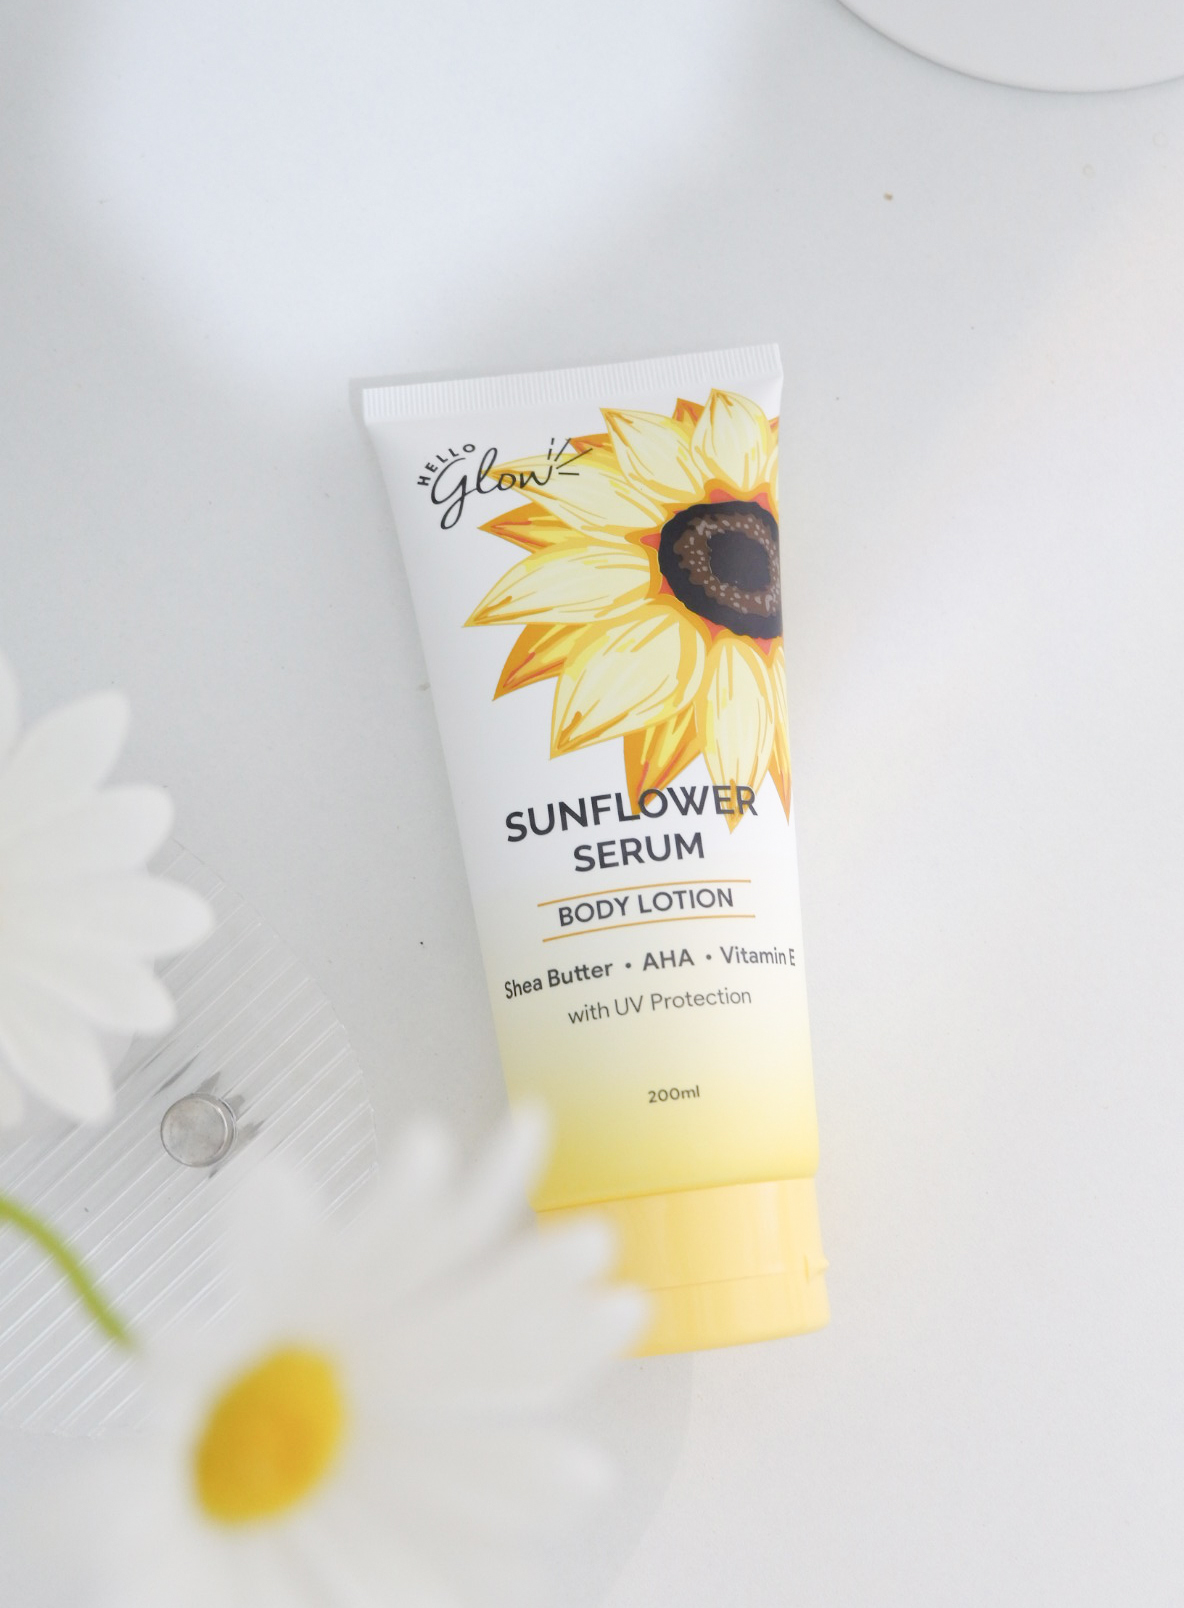 Reveal your radiant and youthful skin! Say hello to Hello Glow’s newest SUNFLOWER COLLECTION!